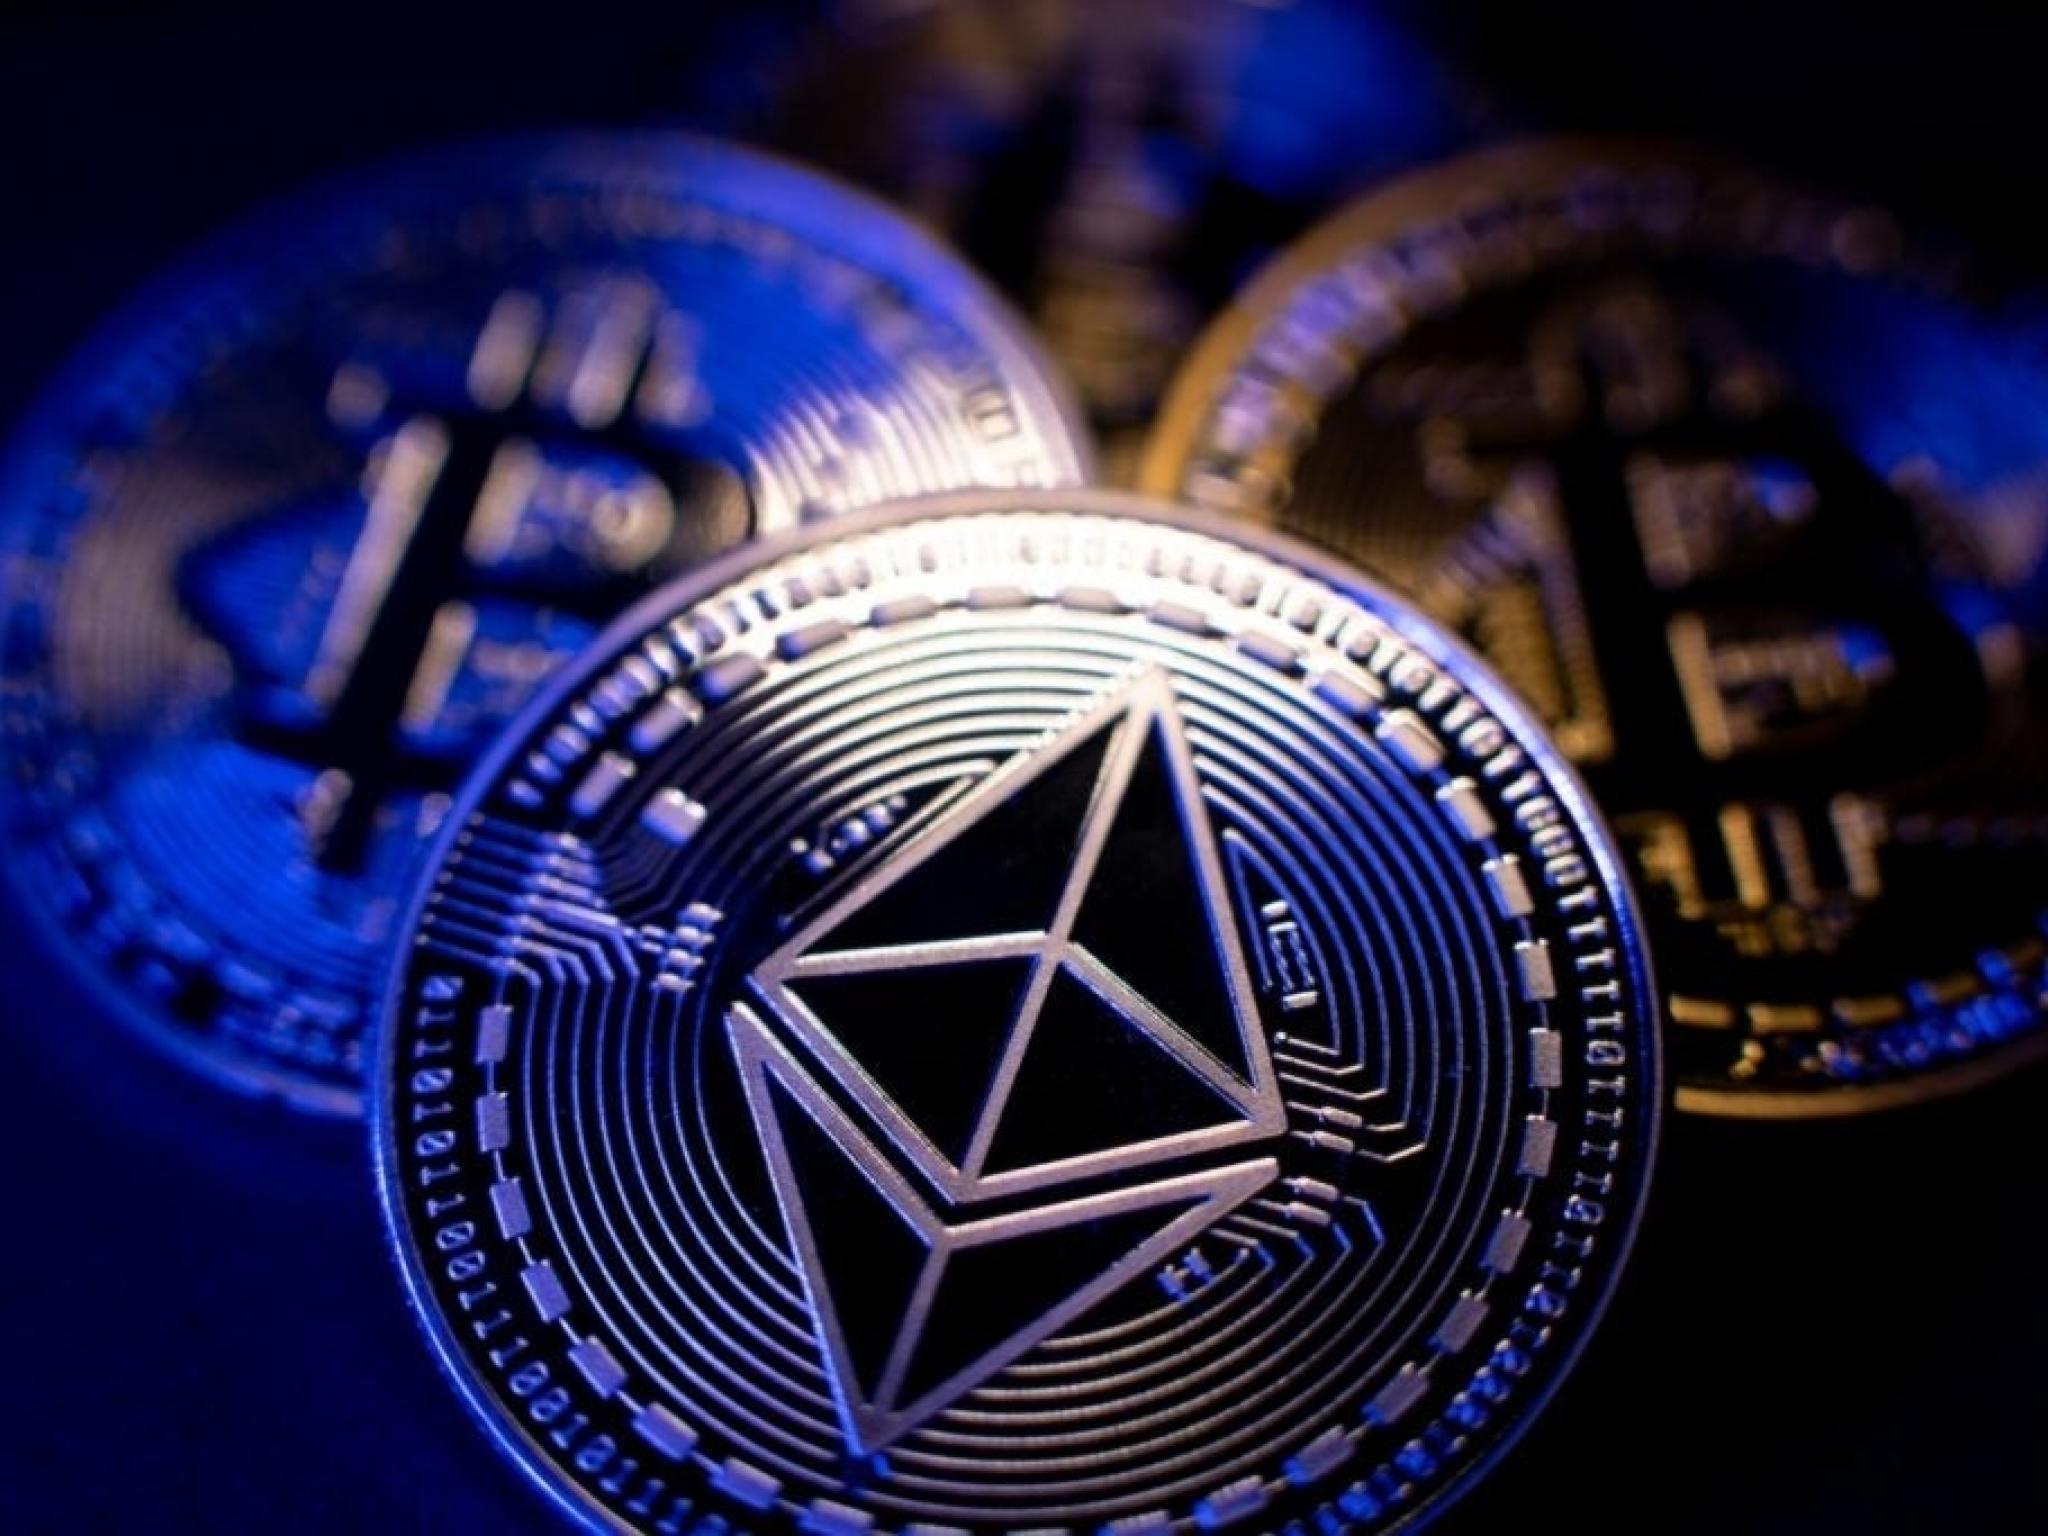  bitcoin-ethereum-face-random-walk-risk-expert-warns-what-does-that-mean 